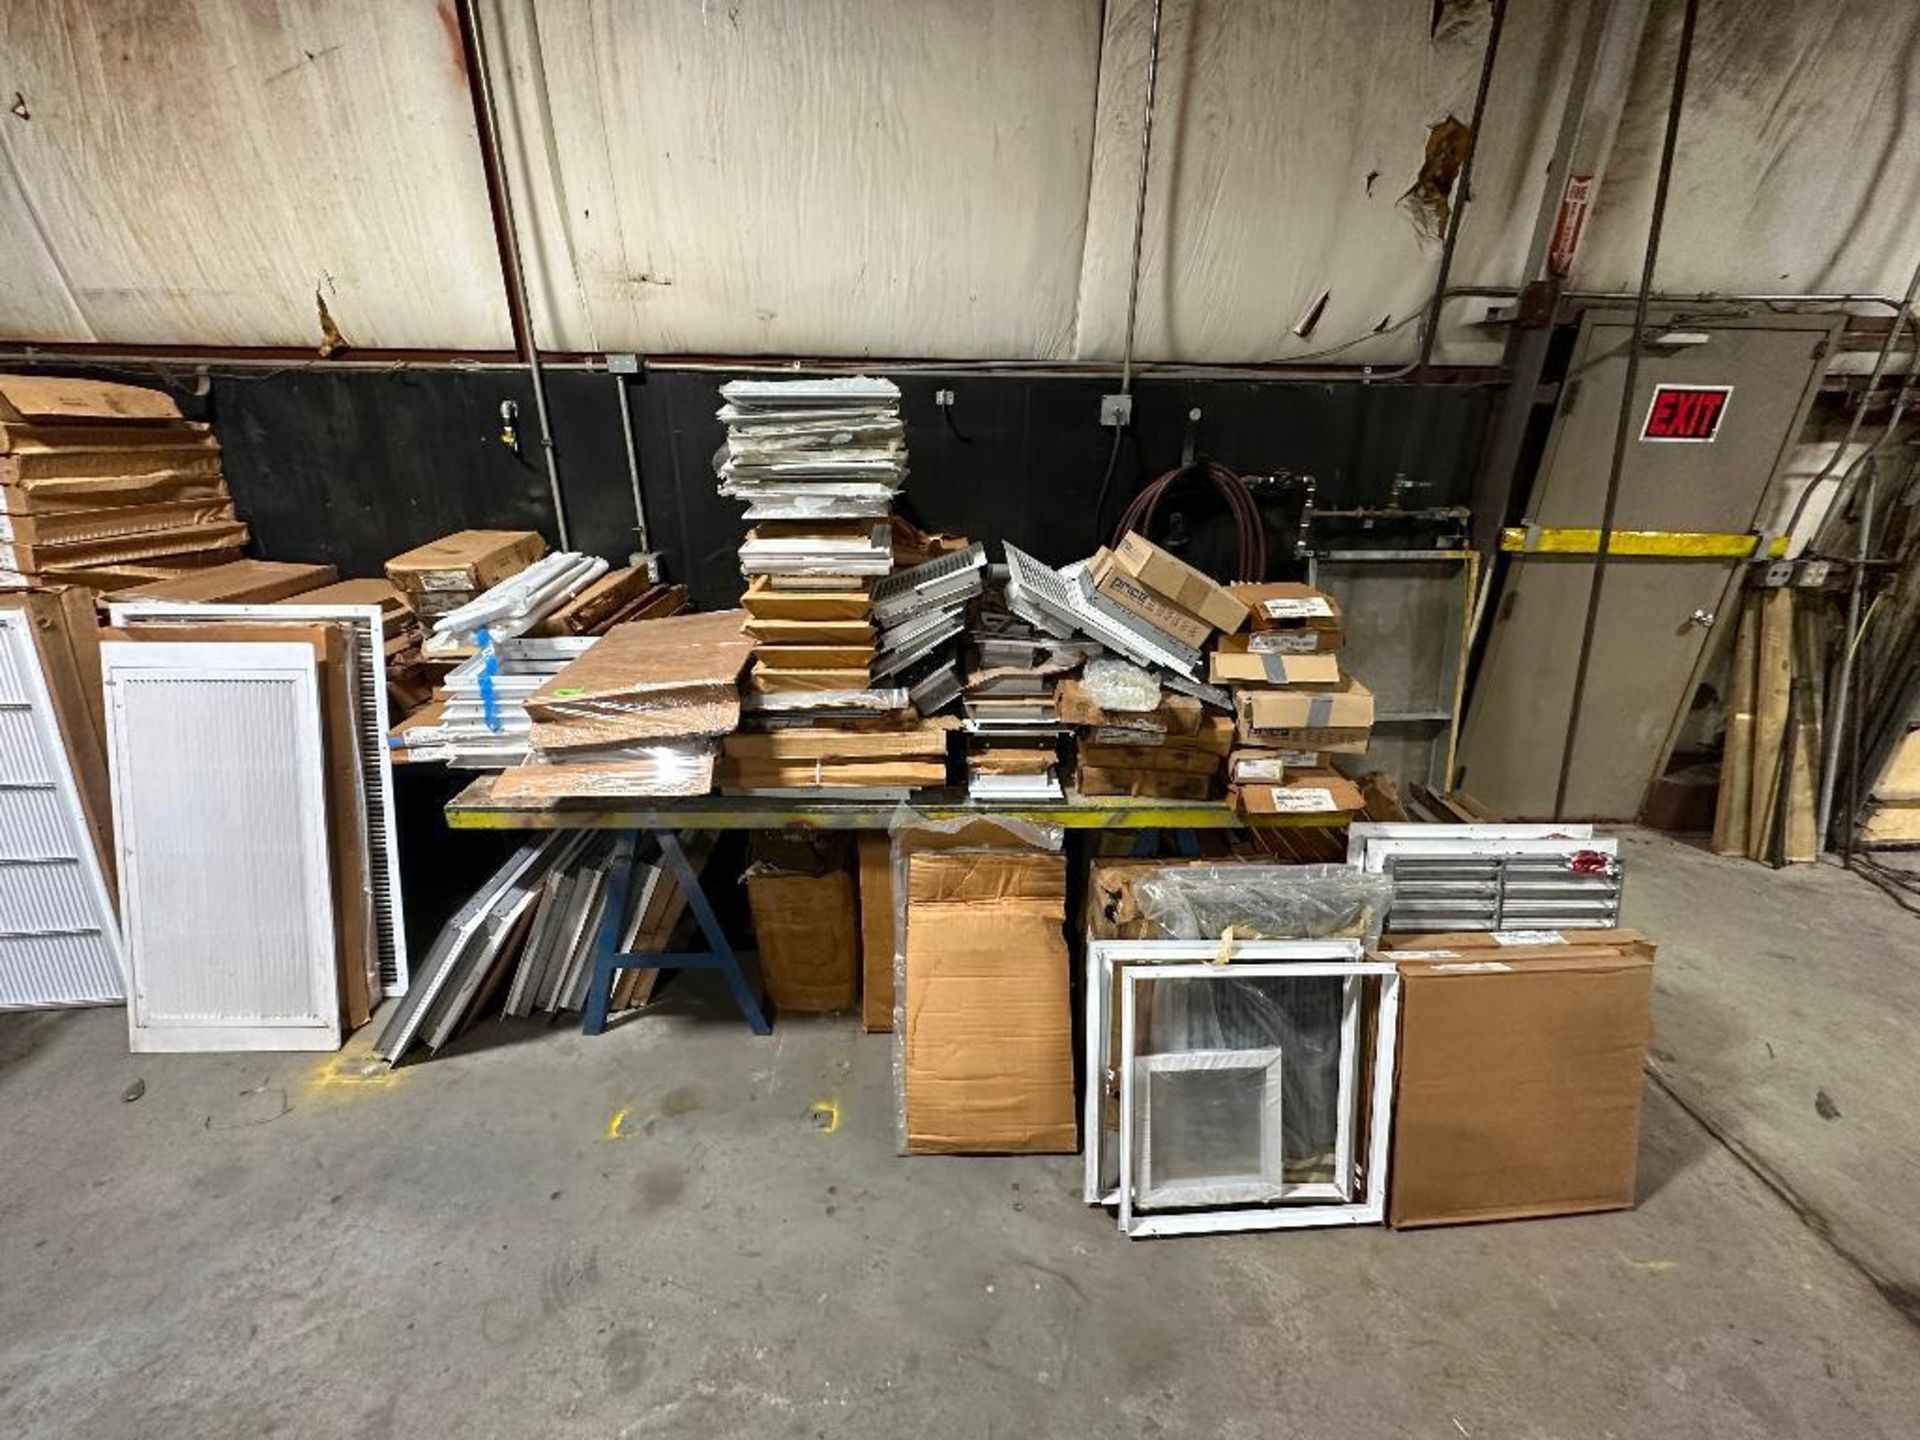 LARGE ASSORTMENT OF REGISTERS, VENT COVERS, AND OTHER HVAC PARTS - Image 3 of 3